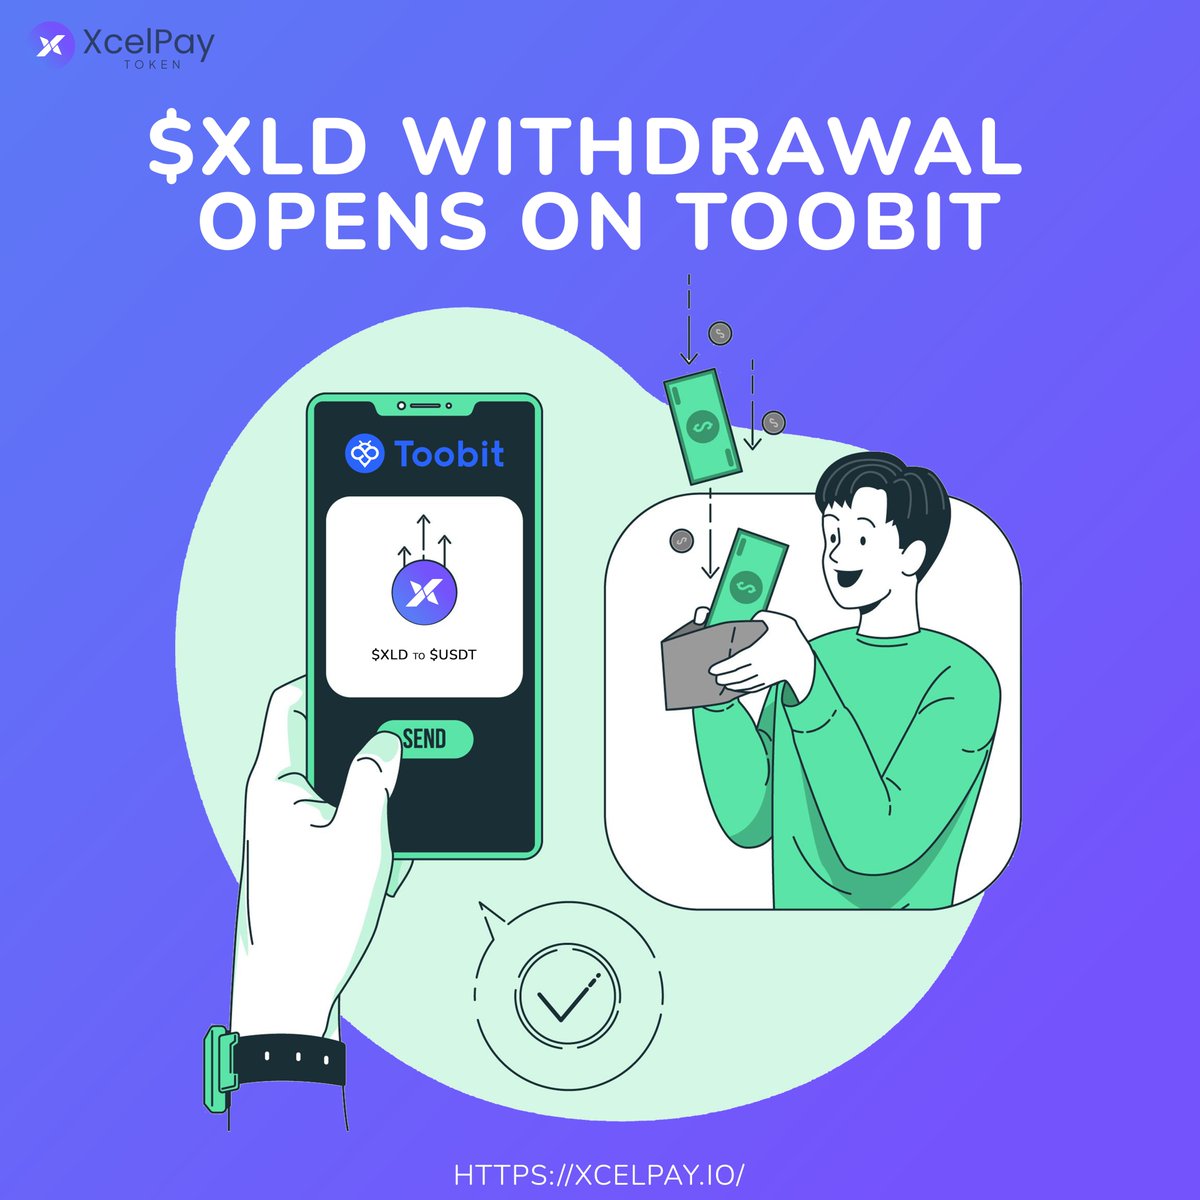 📥 $XLD Withdrawal Now Available on Toobit.

🎉 Good news, traders! We are excited to announce that withdrawals for $XLD are now OPEN on @Toobit_official !

#XLDWithdrawal #CryptoTrading #FinancialFreedom #Toobit